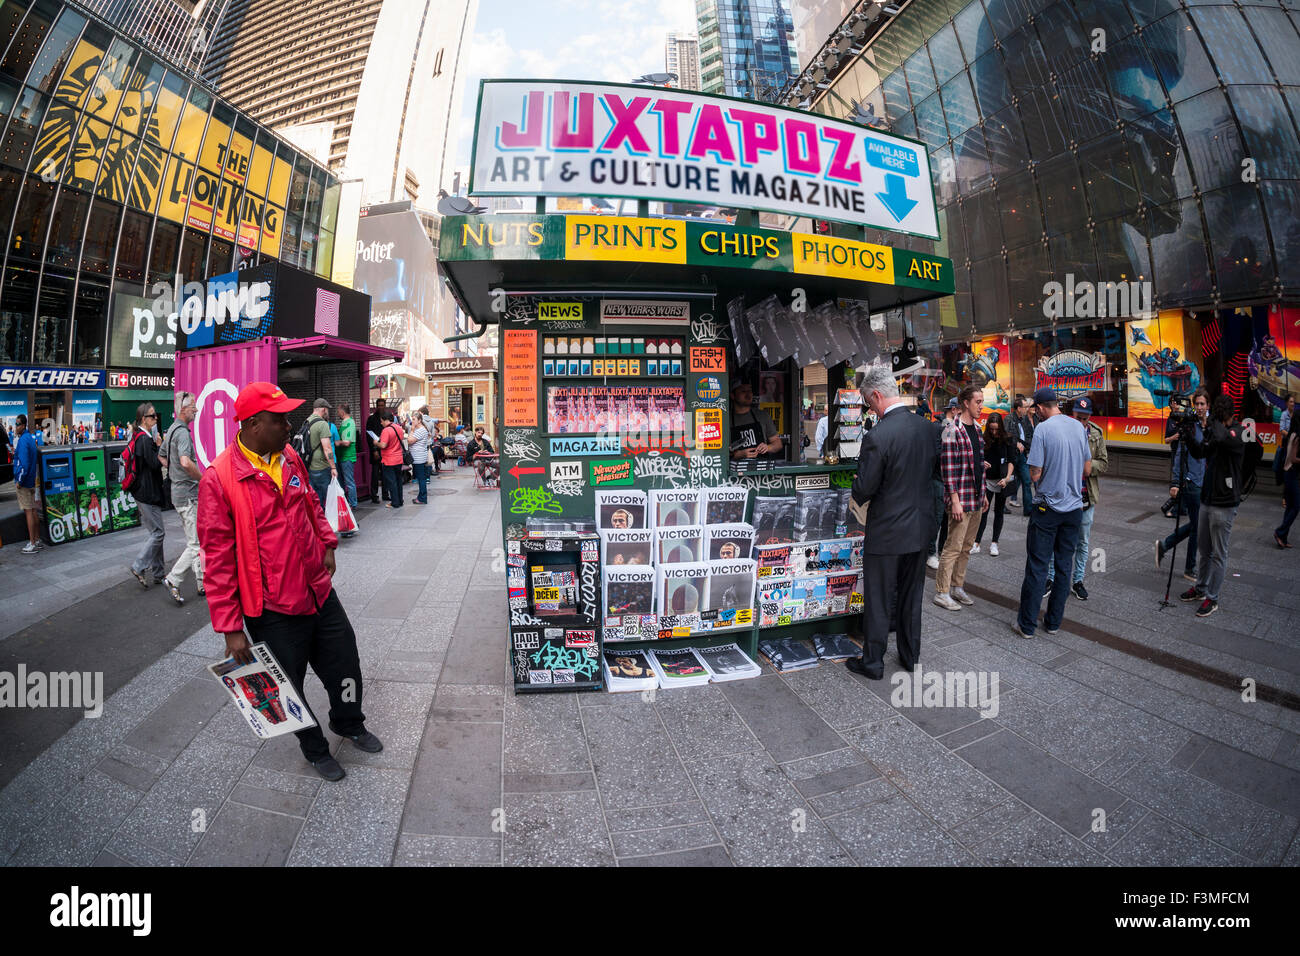 New York, NY, USA. 09th Oct, 2015. The 'T. SQ Newsstand' is debuted in Times Square in New York on Friday, October 9, 2015. Created by the artist Kimou 'Grotesk' Meyer with Victory Journal and Juxtapoz Magazine, the pop-up displays and sells art and culture zines created by a litany of artists. It will be in business at the crossroads of the world until October 18. Credit:  Richard Levine/Alamy Live News Stock Photo